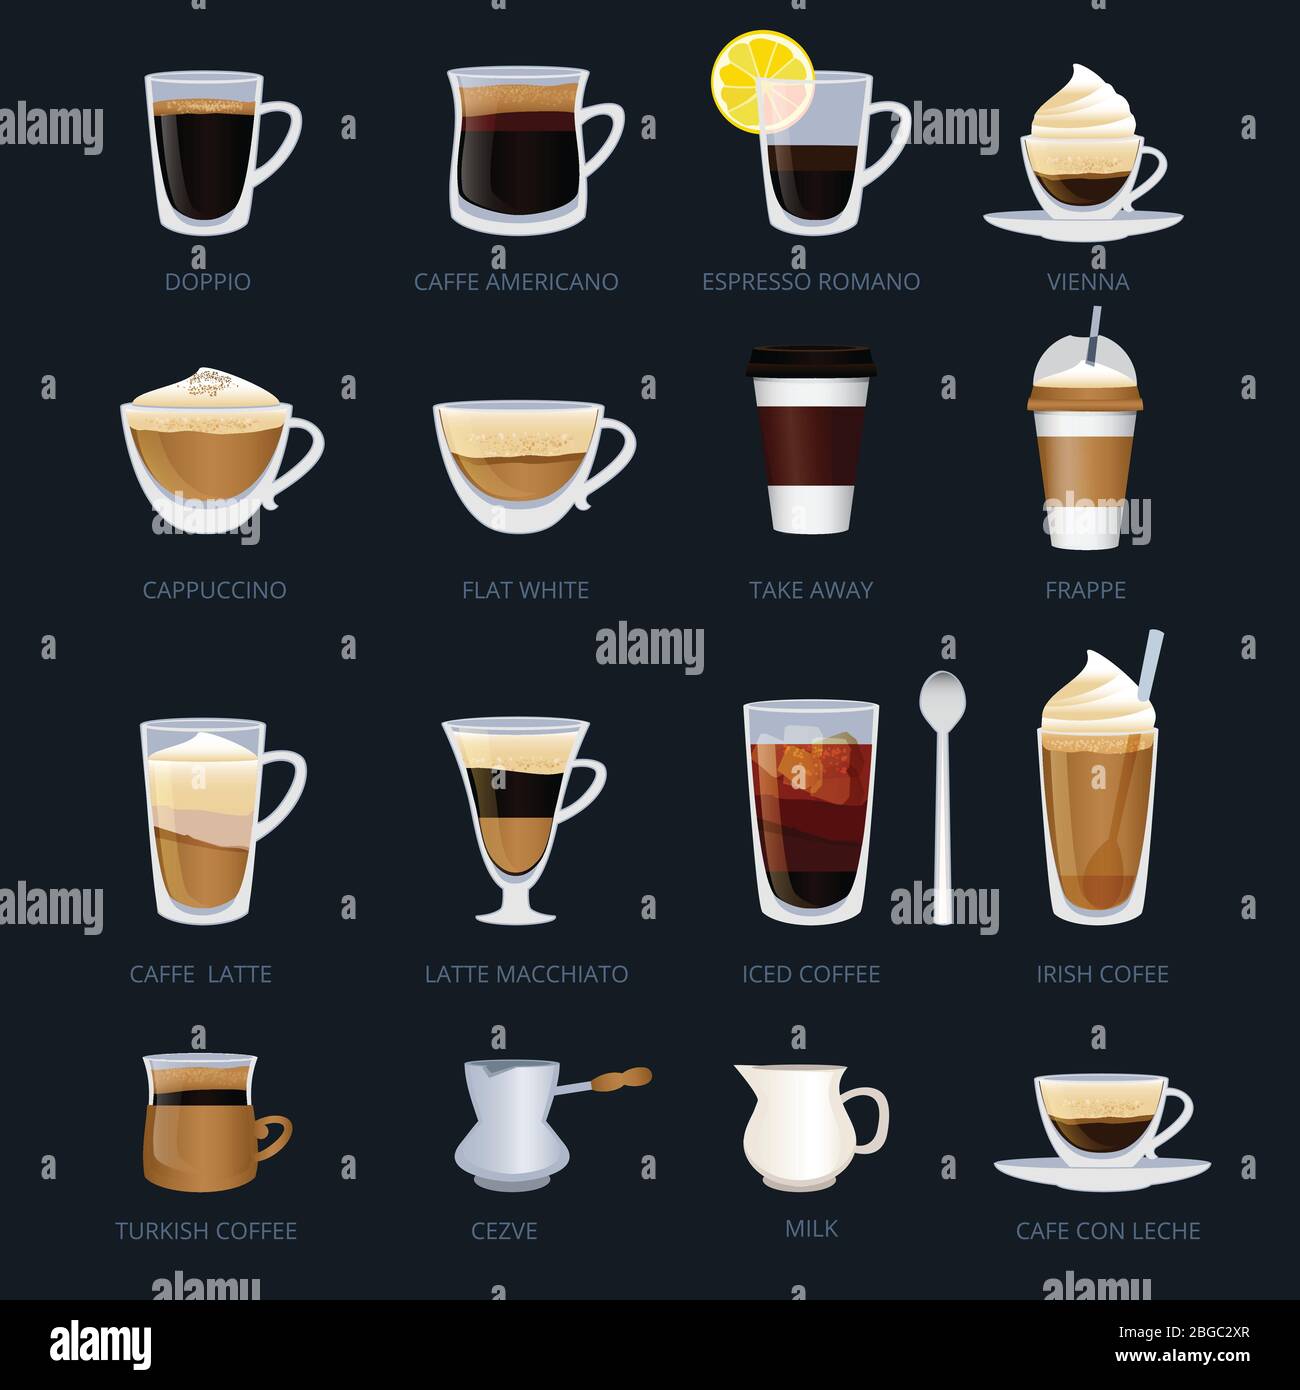 What is a Macchiato? (Difference Between Types of Macchiato)